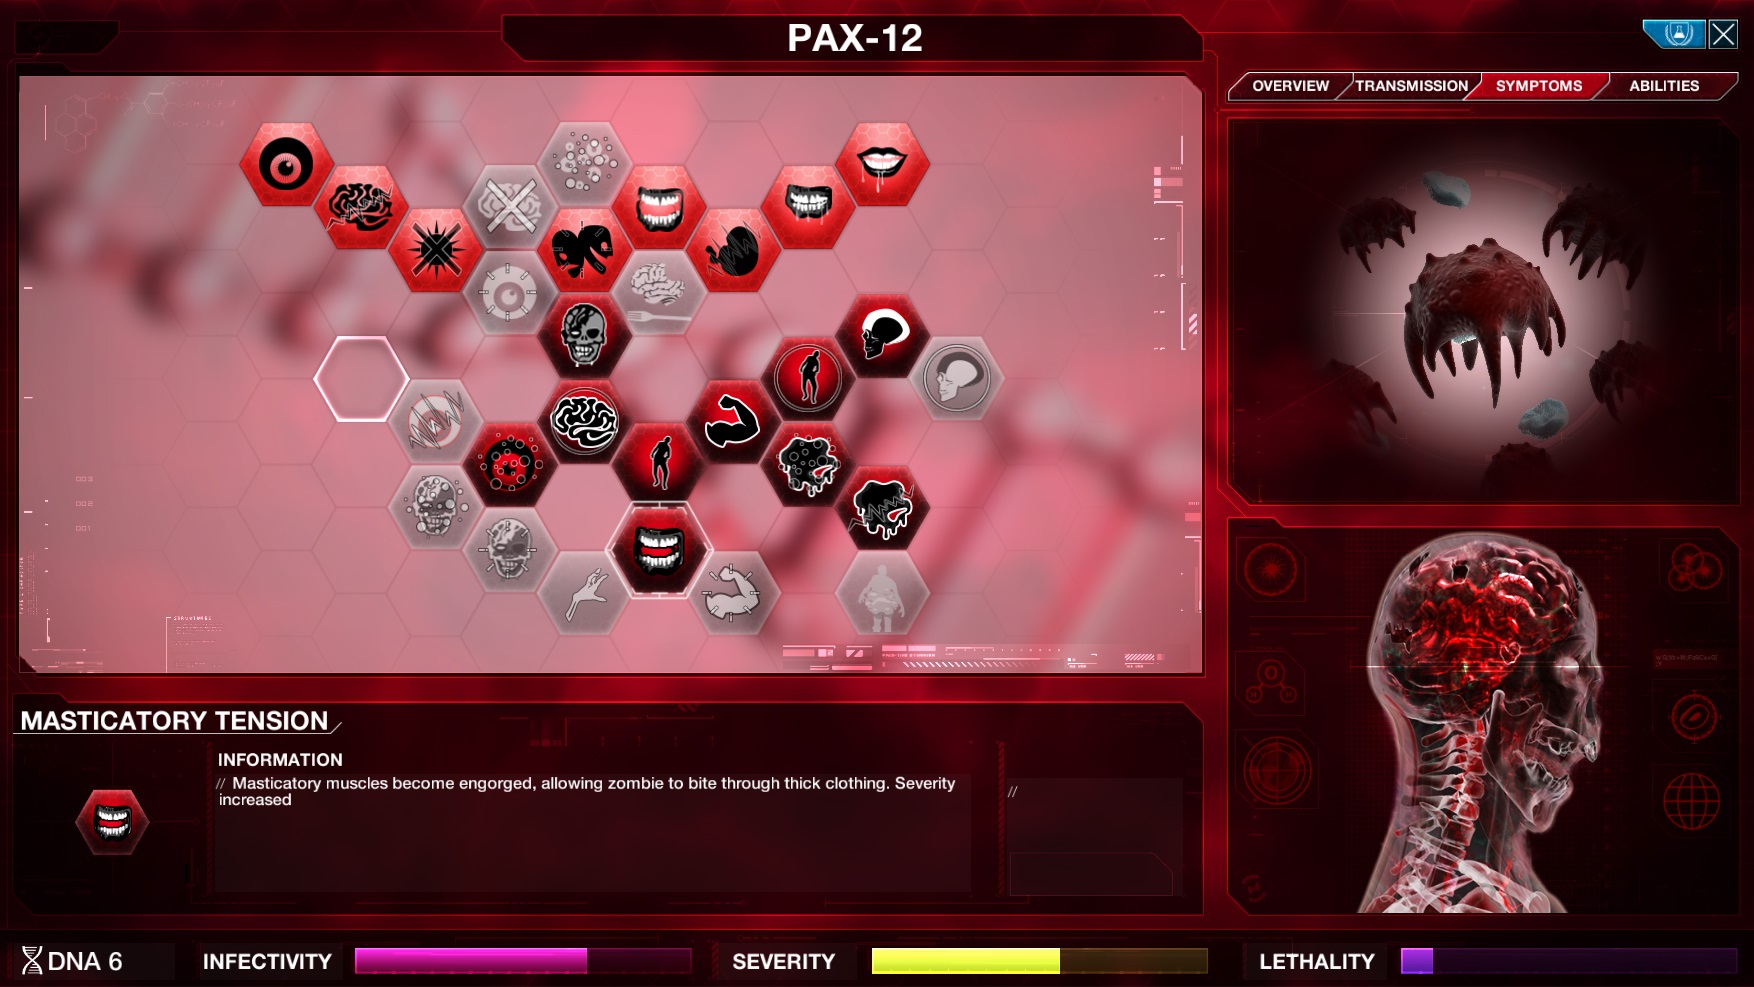 Plague Inc PS4 Version Full Game Free Download